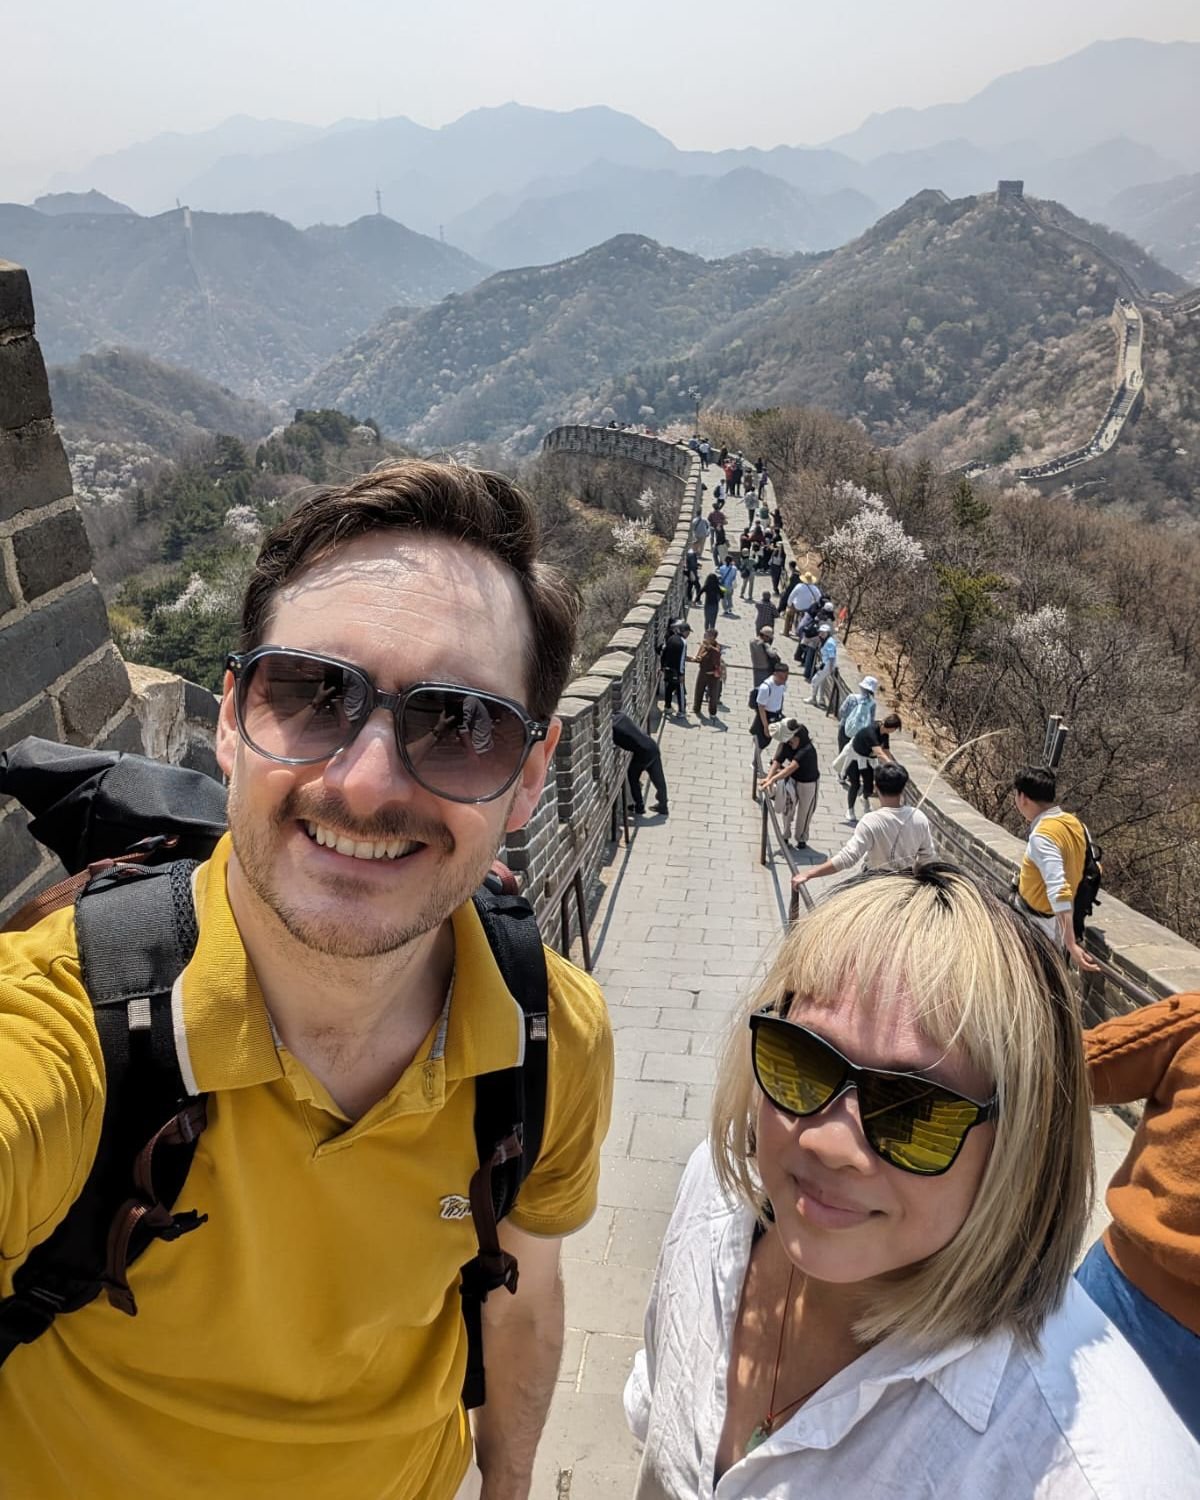 Whilst we were in China, we took a rest day in-between ideation workshops and training to walk the Great Wall of China at Badaling in the Yanqing district. And, it was simply incredible.

Taking a break to rest-up during or after energy intensive cre